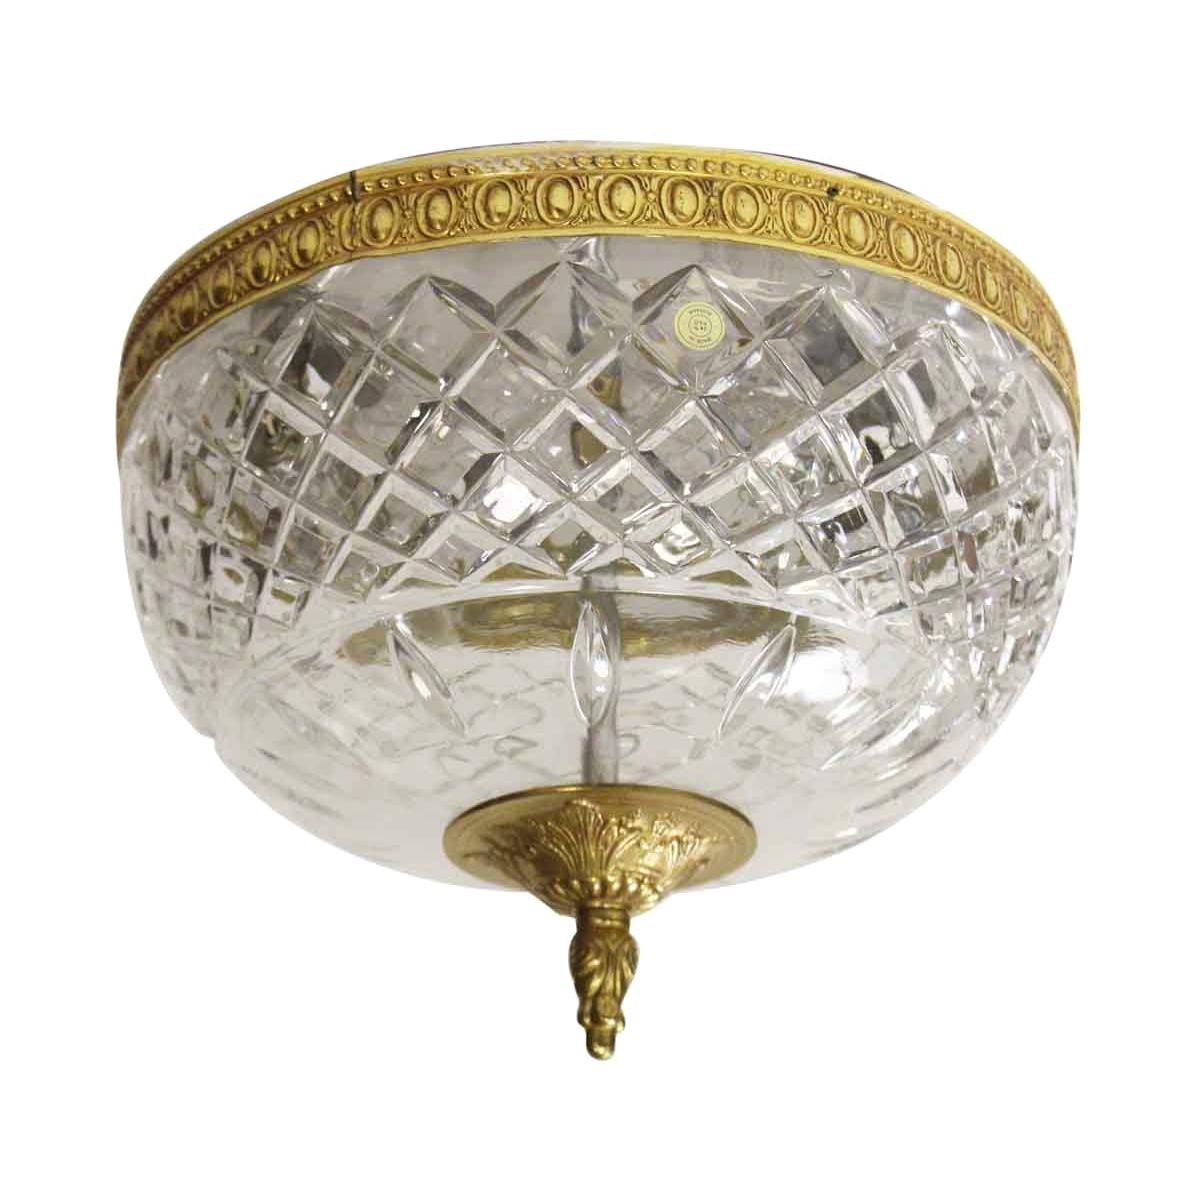 Waldorf Astoria Hotel Flush Mount Light Fixture Qty Available Brass and Crystal 